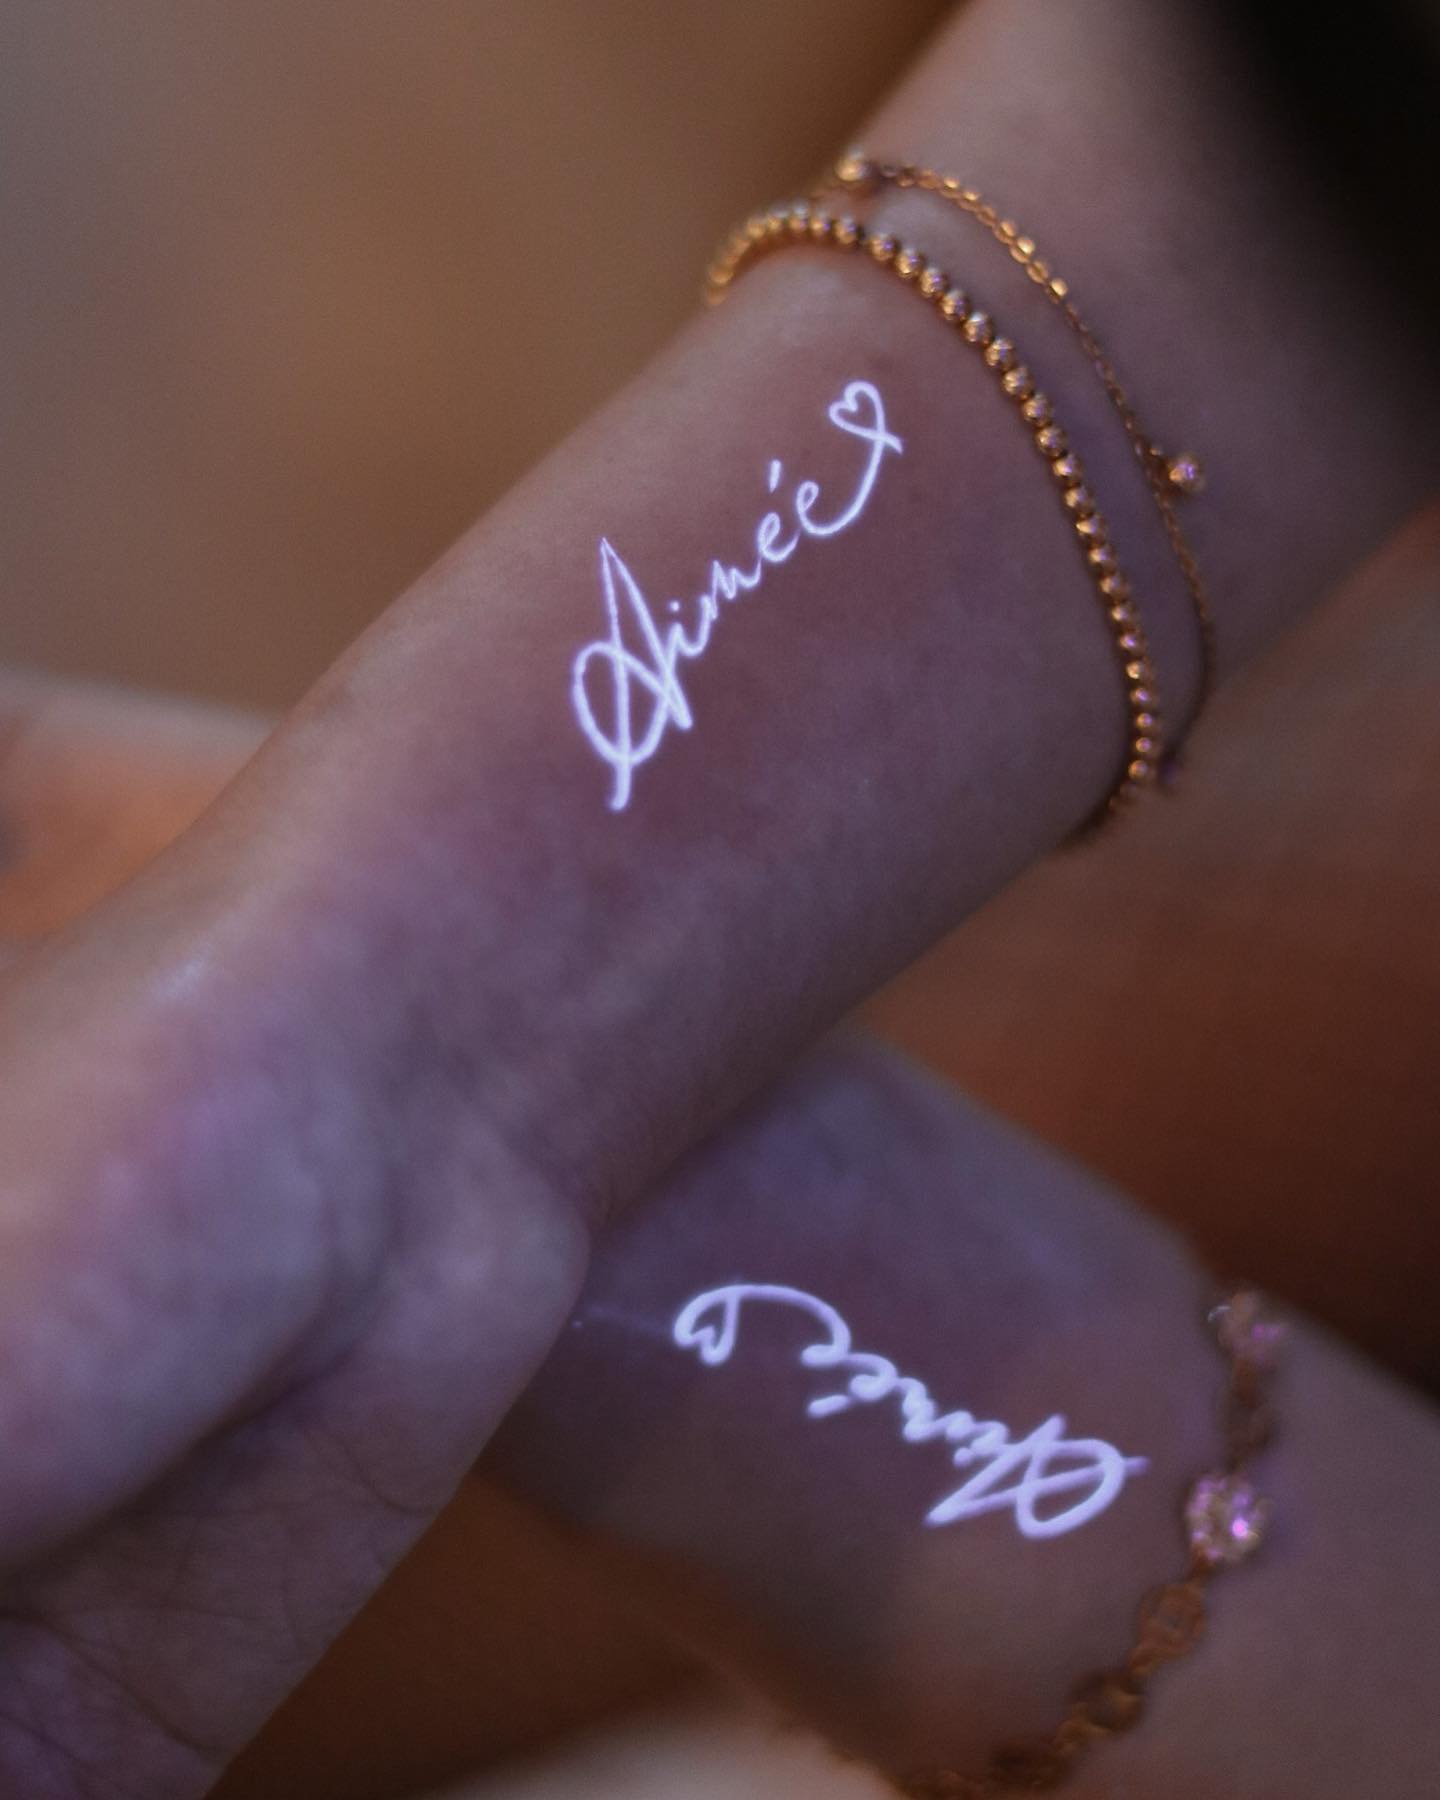 Couple white ink tattoo is good to show the love and bond of two people. This kind of tattoo is amazing in the way that it shows how much you love your partner and want to show everyone how much you care for her/him.